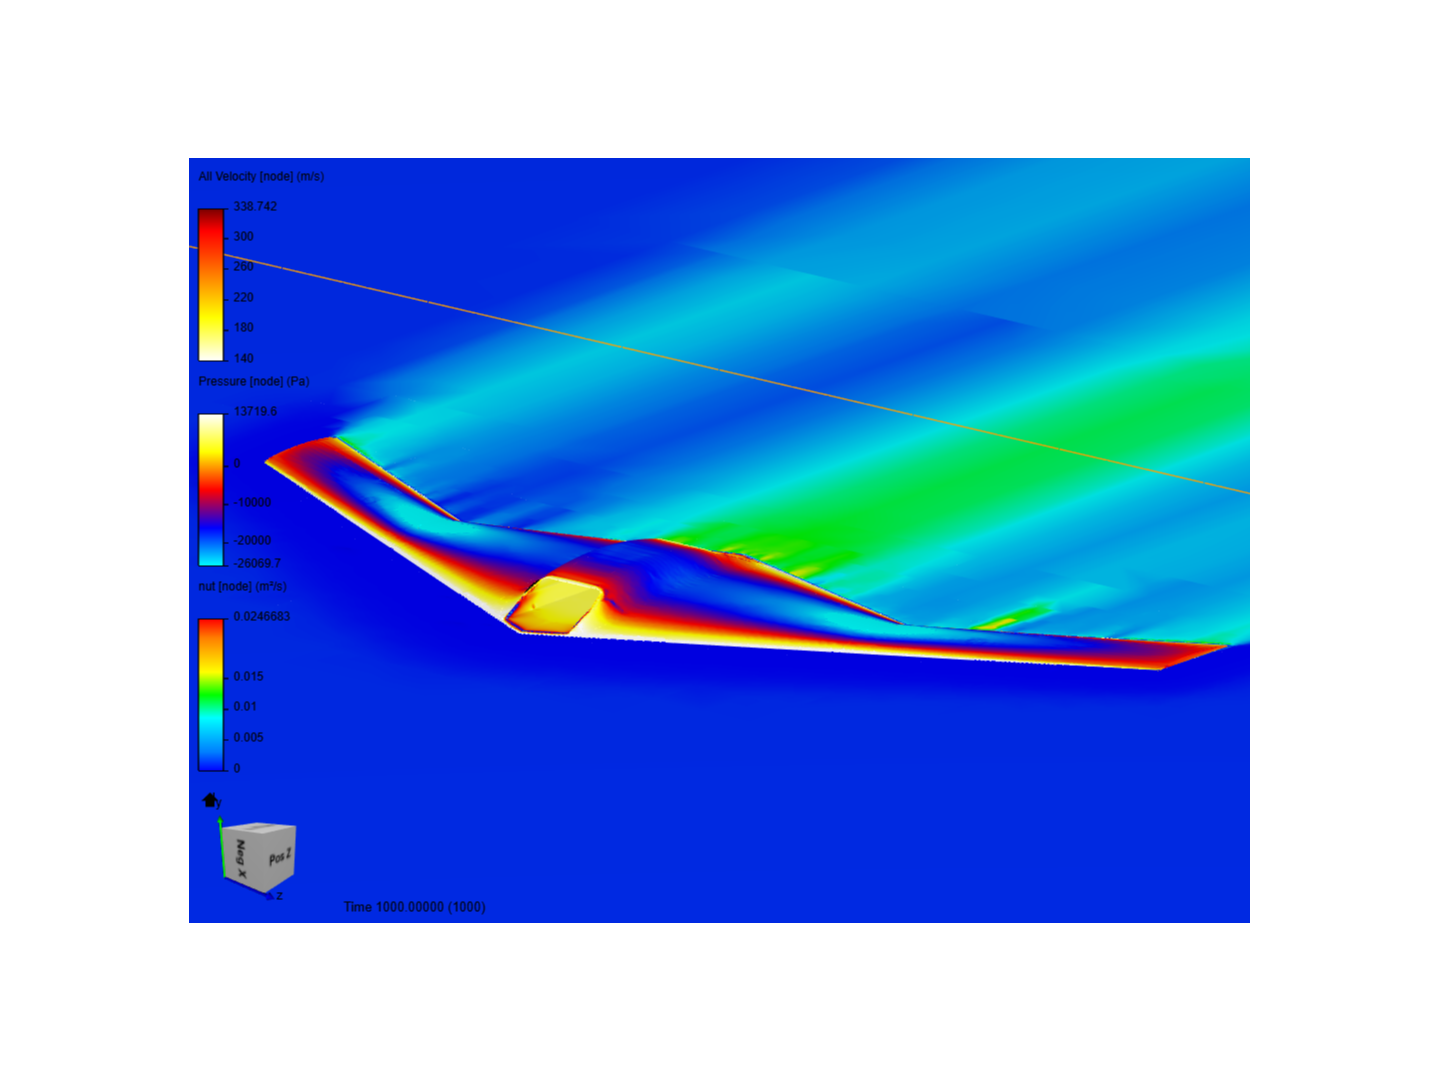 Drone LM RQ-170 Sentinel CFD - Drag Coefficient image